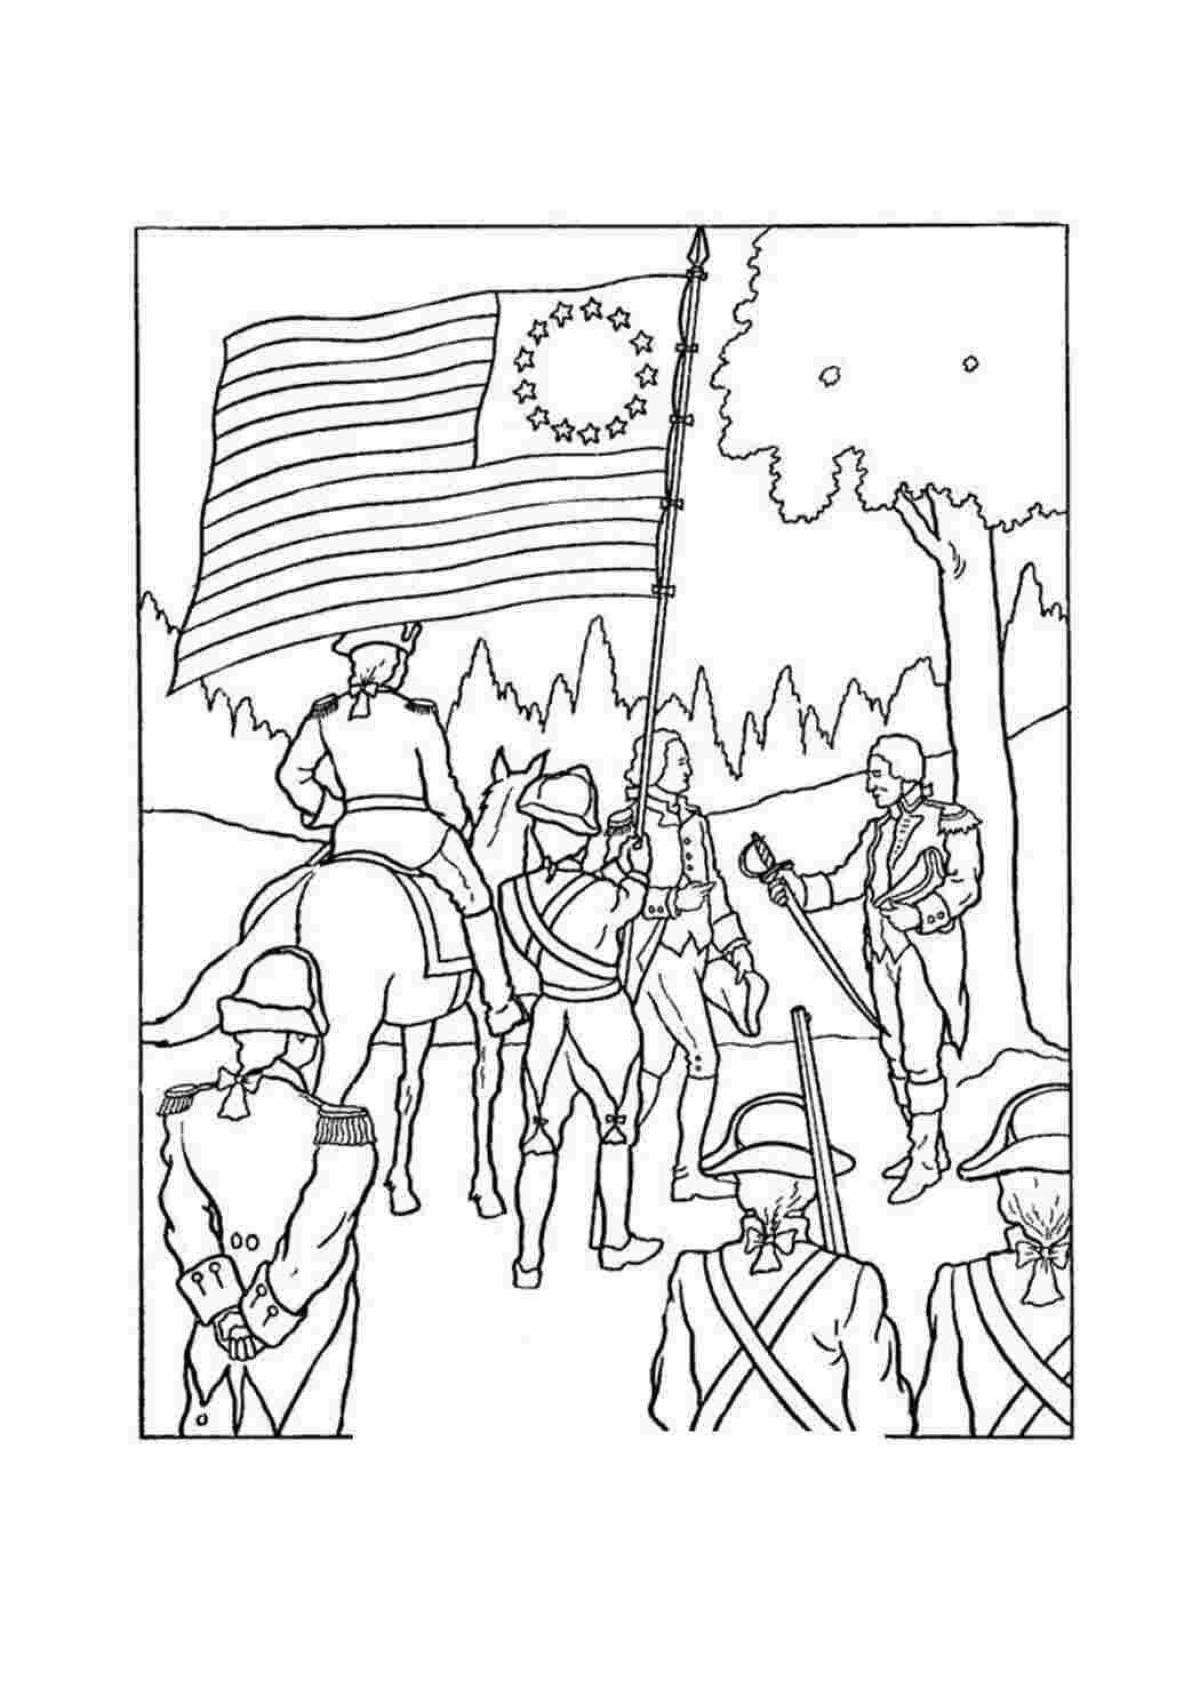 Coloring page with attractive civic content